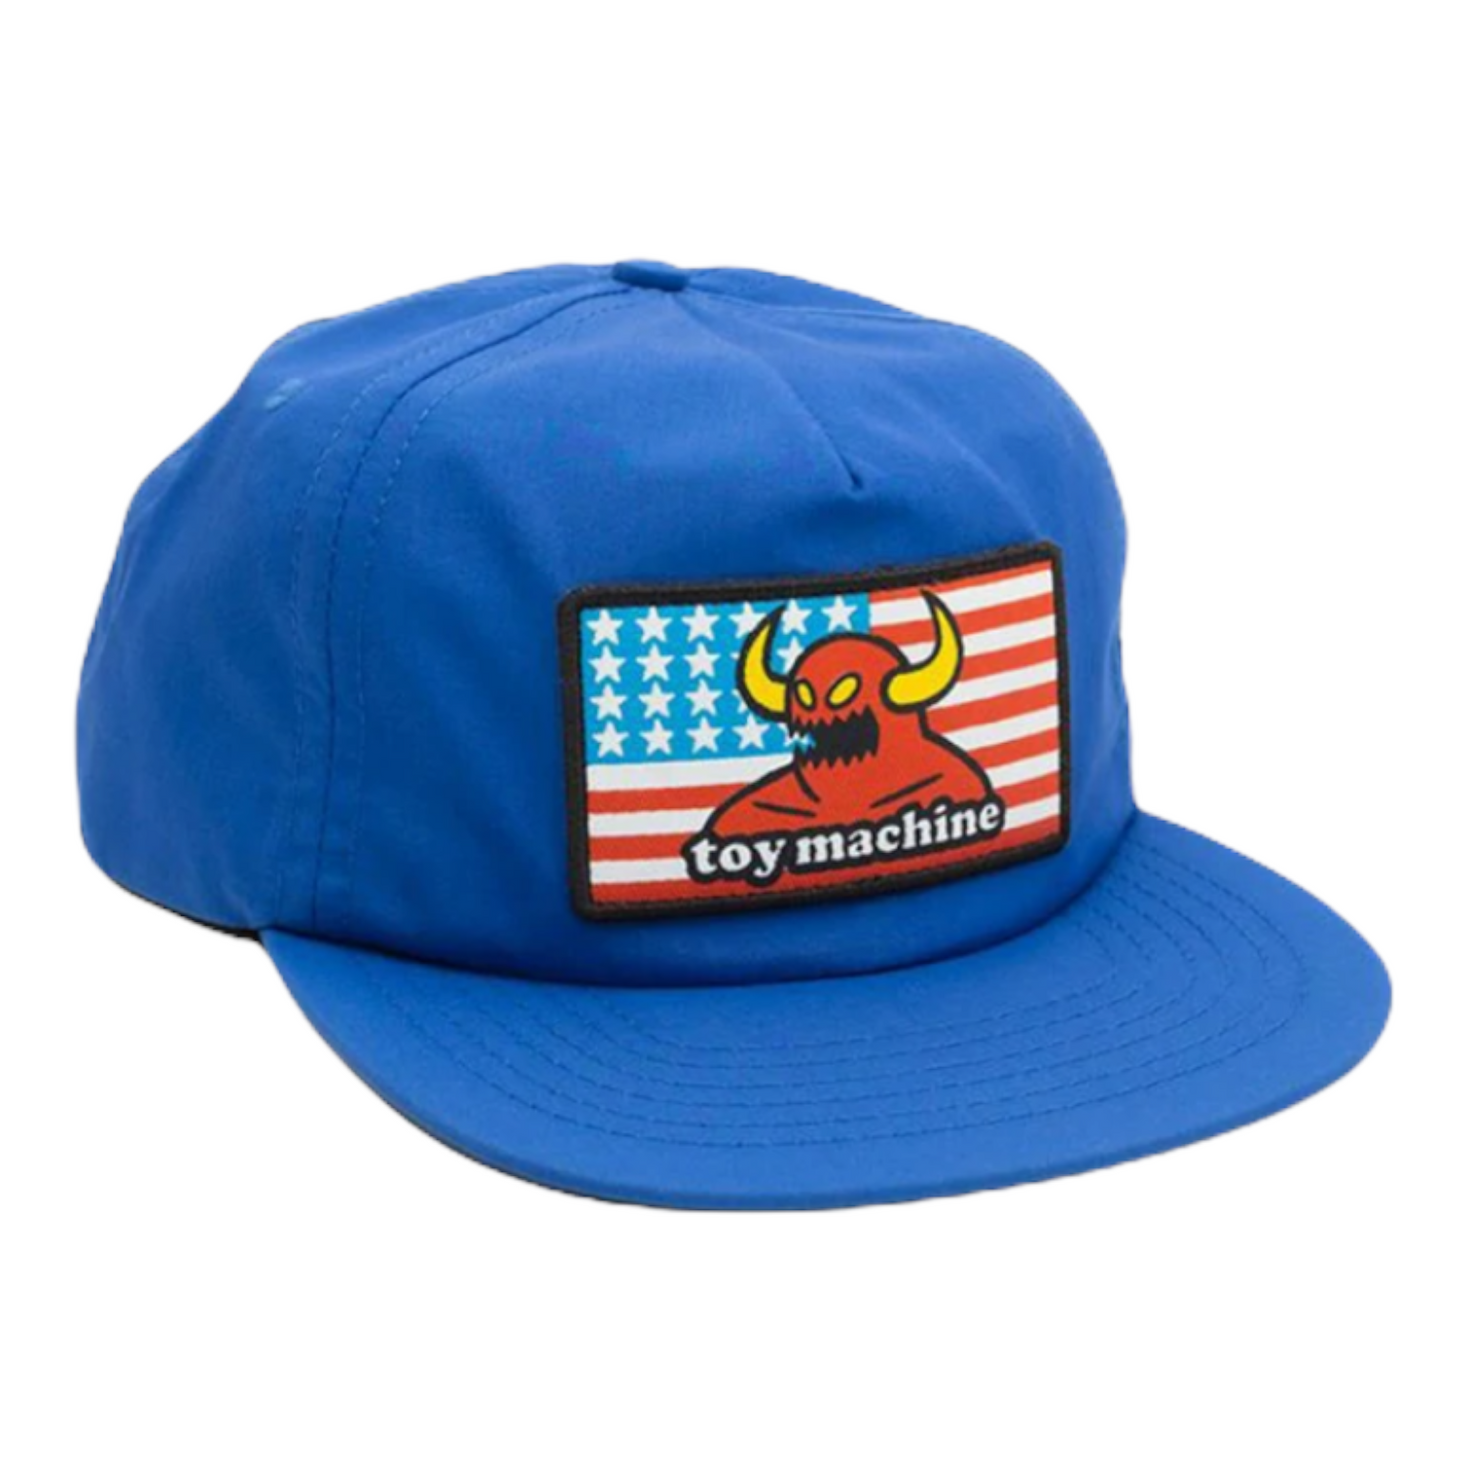 TOY MACHINE HAT AMERICAN MONSTER UNSTRUCTURED BLUE - The Drive Skateshop